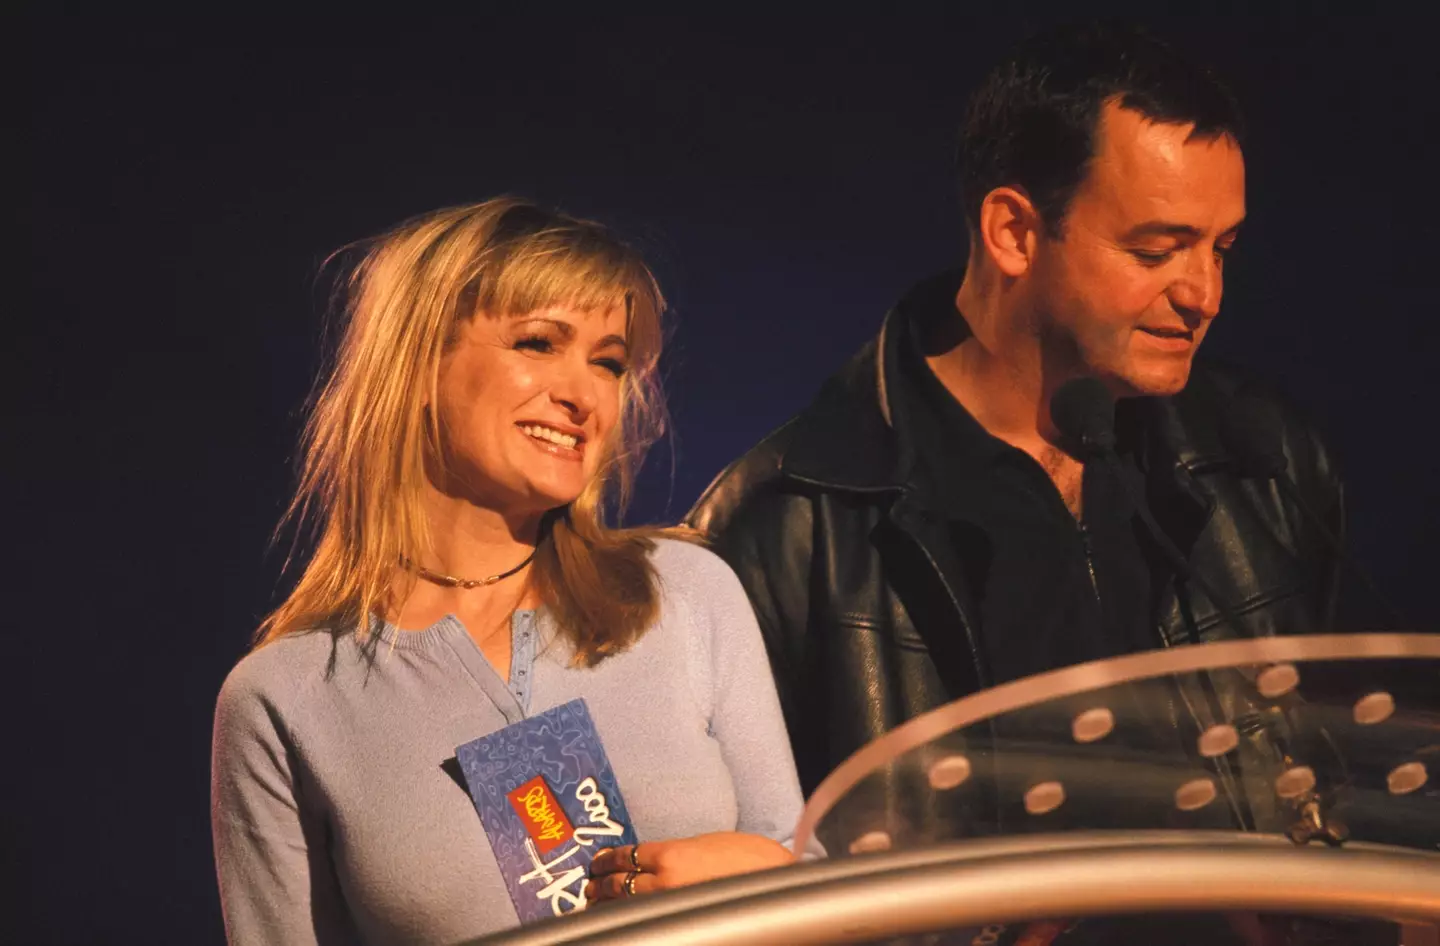 Caroline Aherne and Craig Cash played a couple on TV and were friends off it.